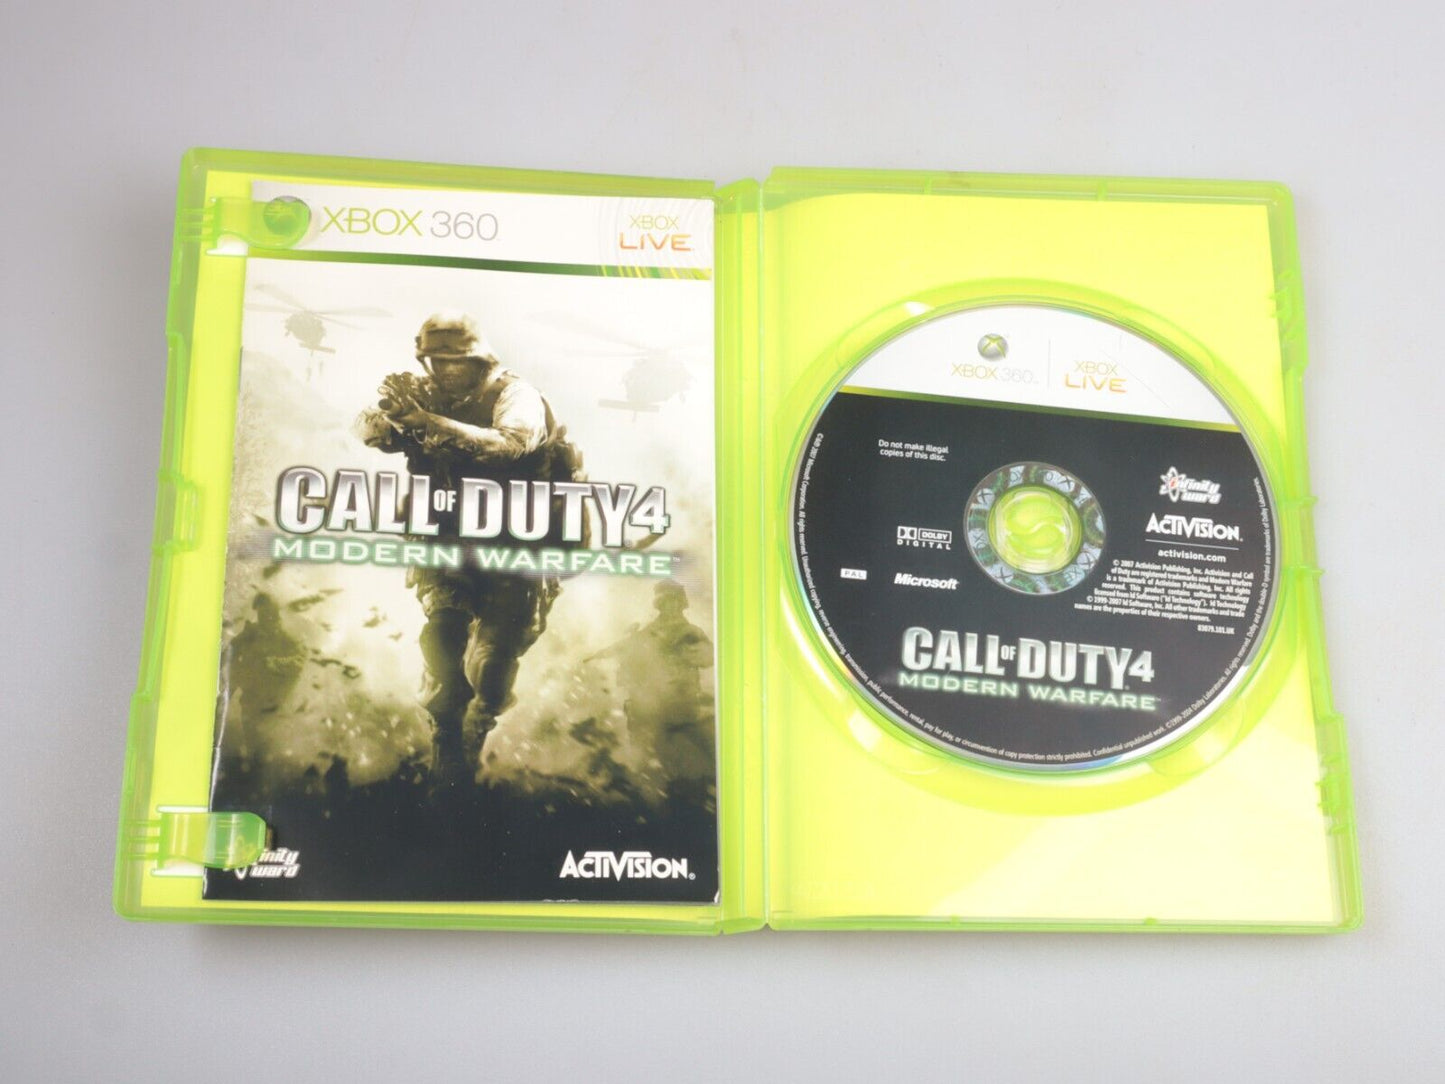 Xbox 360 | Call Of Duty 4 Modern Warfare - Game Of The Year Edition